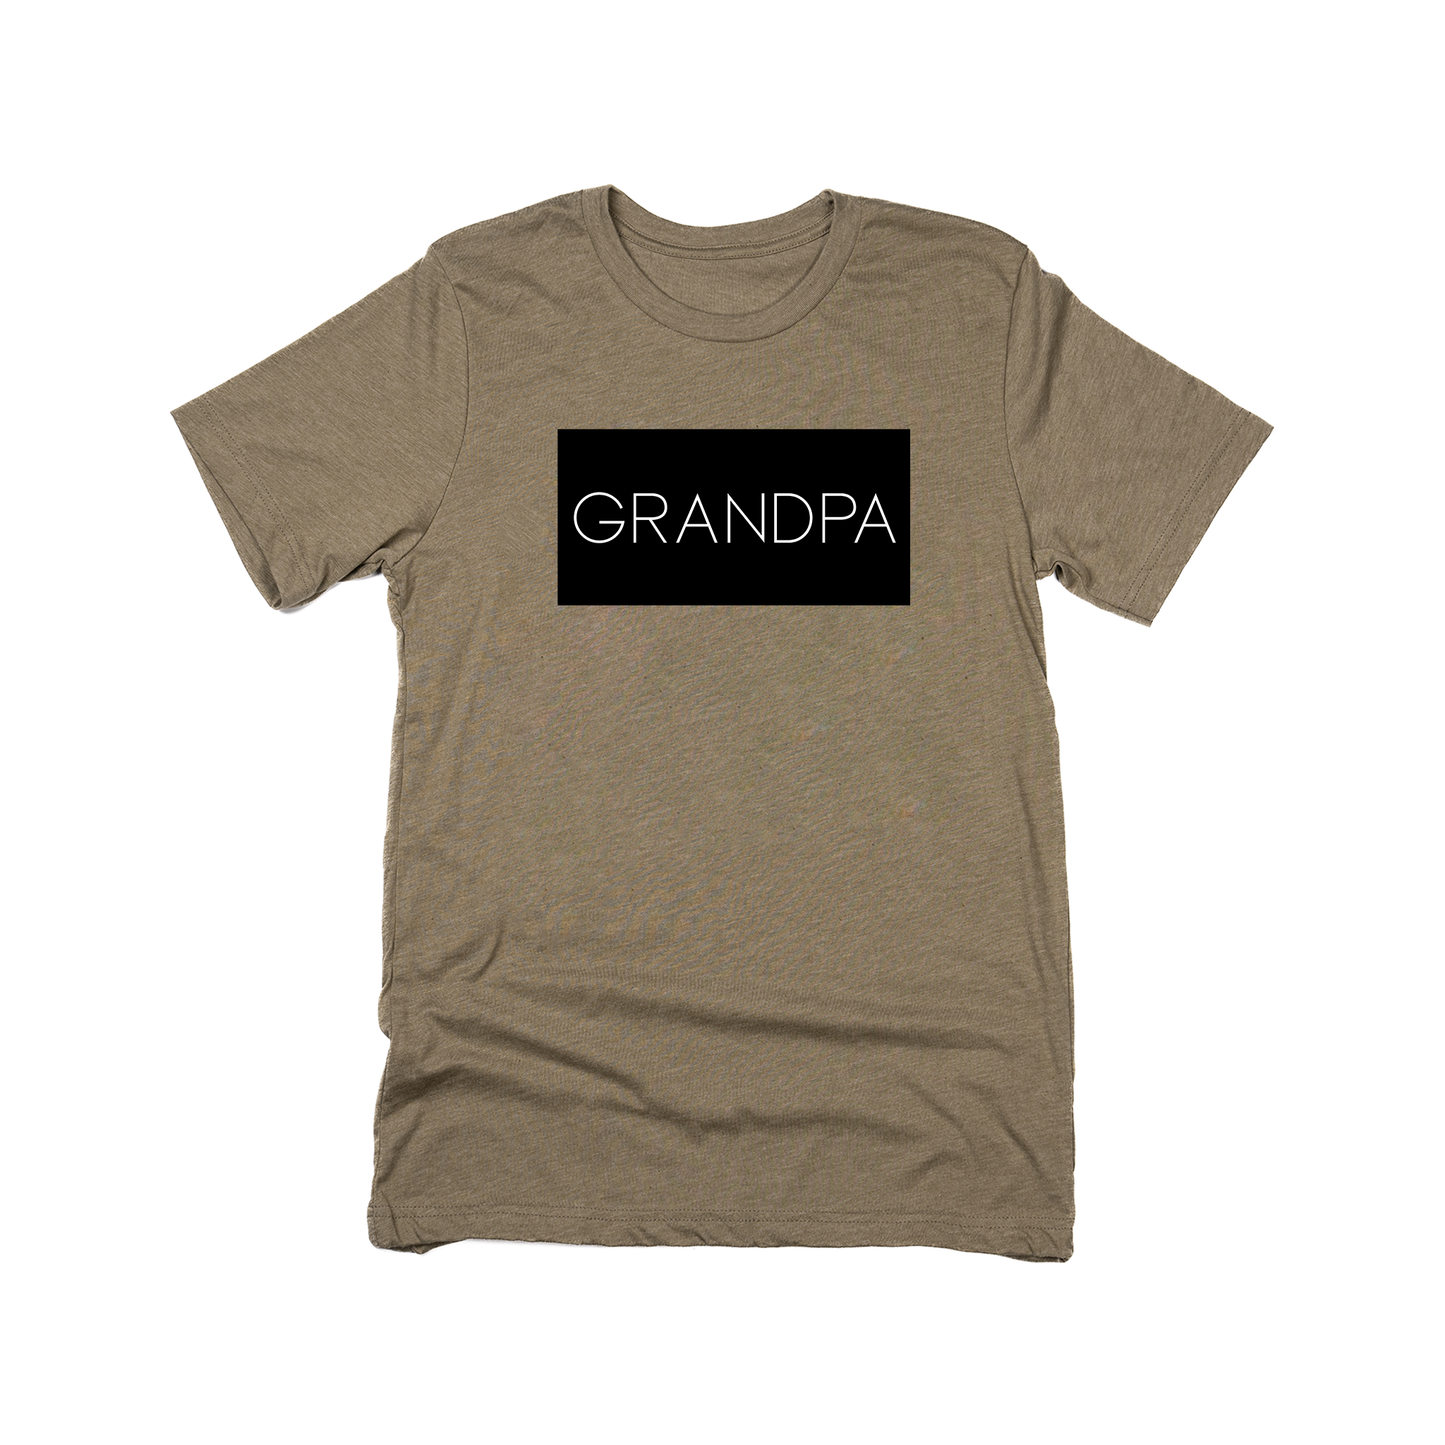 Grandpa (Boxed Collection, Black Box/White Text, Across Front) - Tee (Olive)